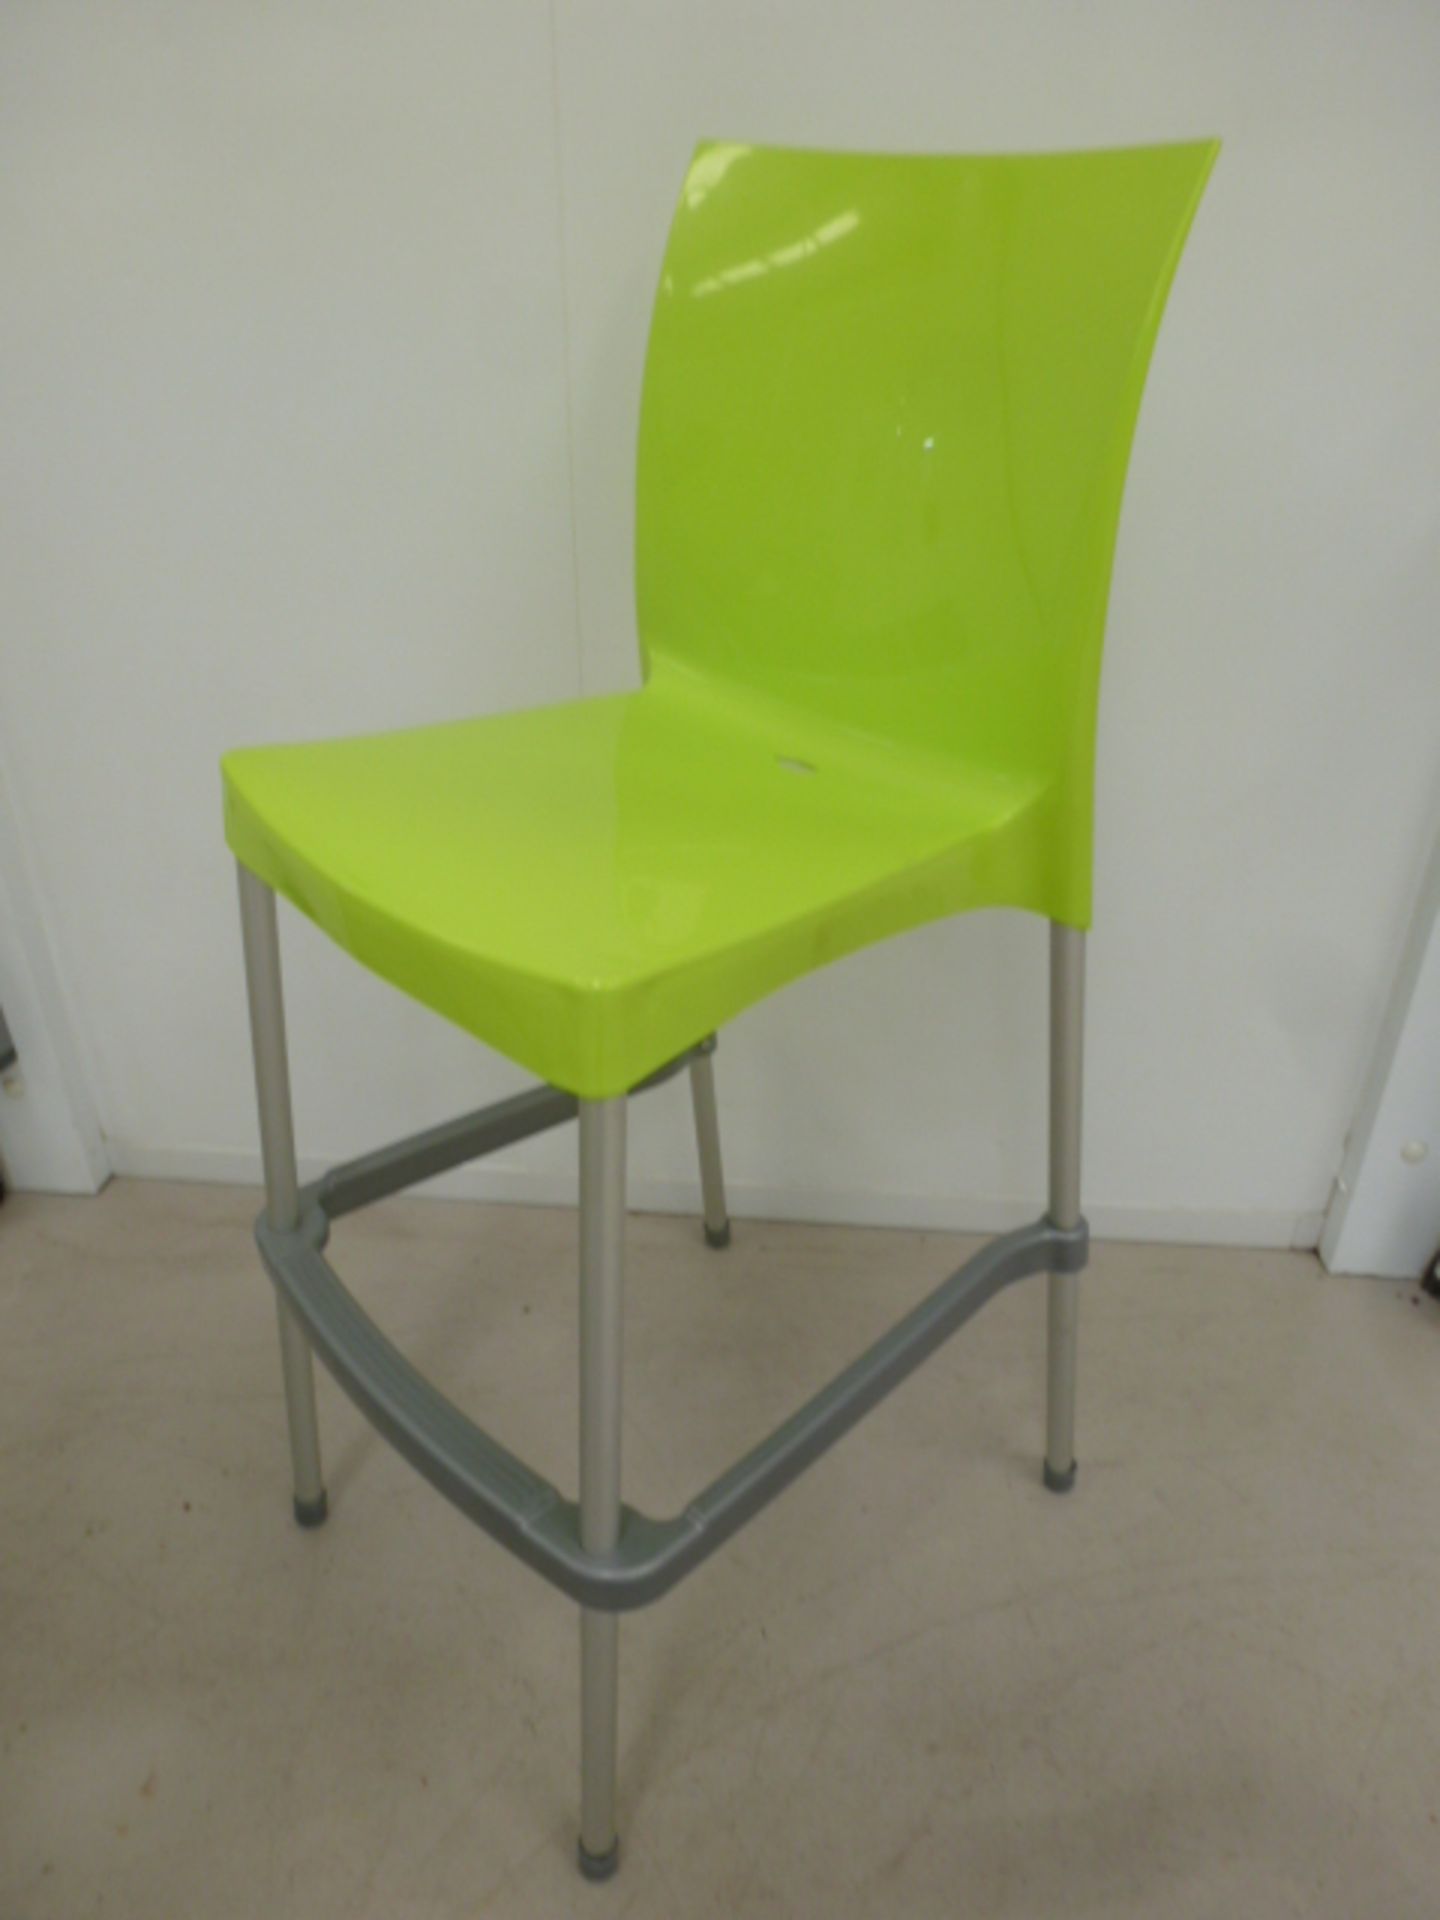 White Round Top Table (Dia 80cm x H 12cm) on Chrome Base with 4 x Plastic Lime Green Stools - Image 4 of 4